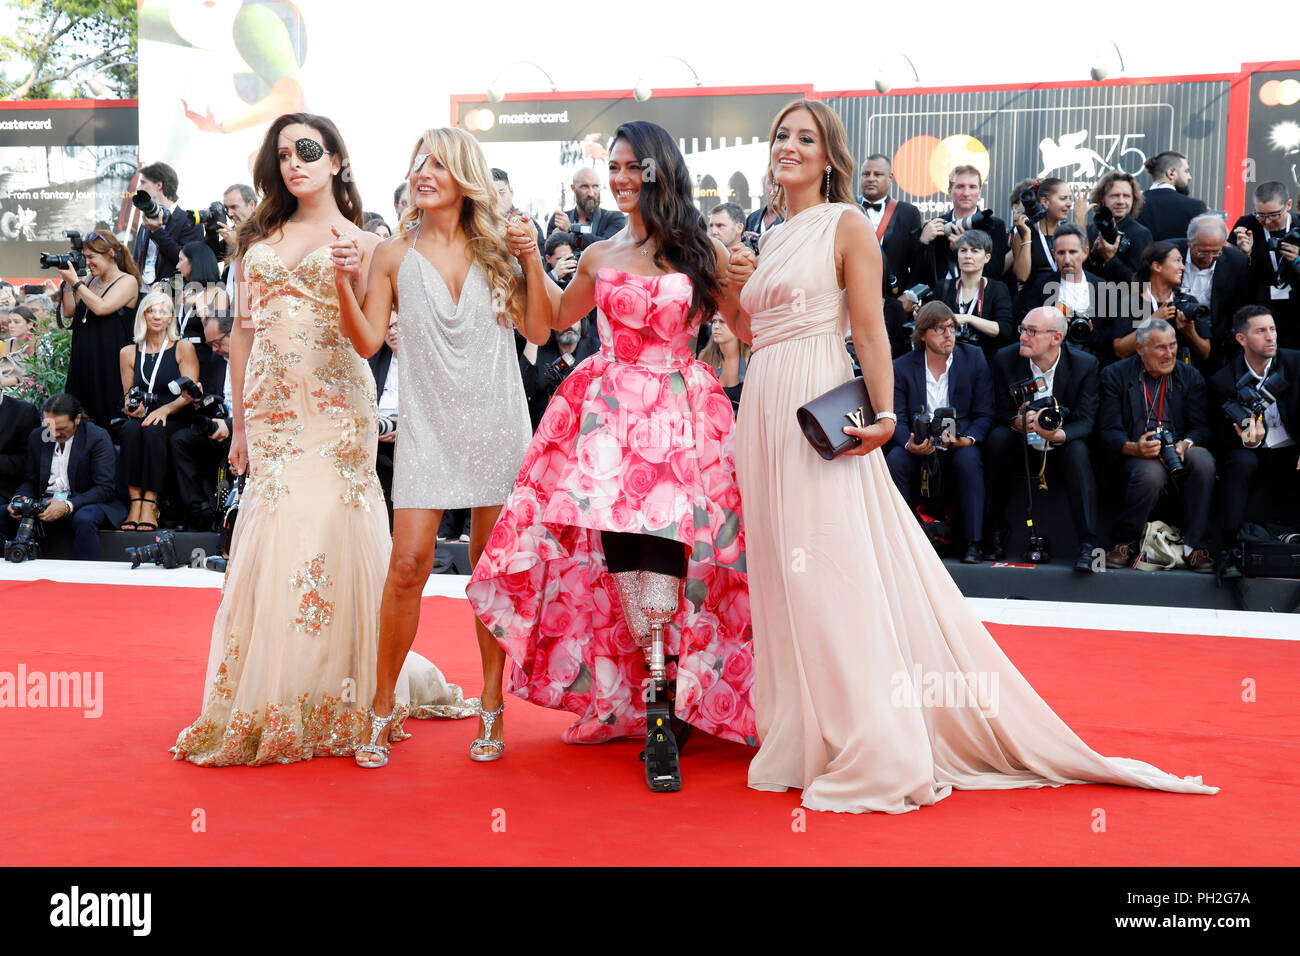 Venice, Italy. 29th Aug, 2018. Gessica Notaro, Jo Squillo, Giusy Versace and guest attend the 'First Man' premiere and opening of the 75th Venice Film Festival at the Palazzo del Cinema on August 29, 2018 in Venice, Italy. Credit: John Rasimus/Media Punch ***France, Sweden, Norway, Denark, Finland, Usa, Czech Republic, South America Only***/Alamy Live News Stock Photo